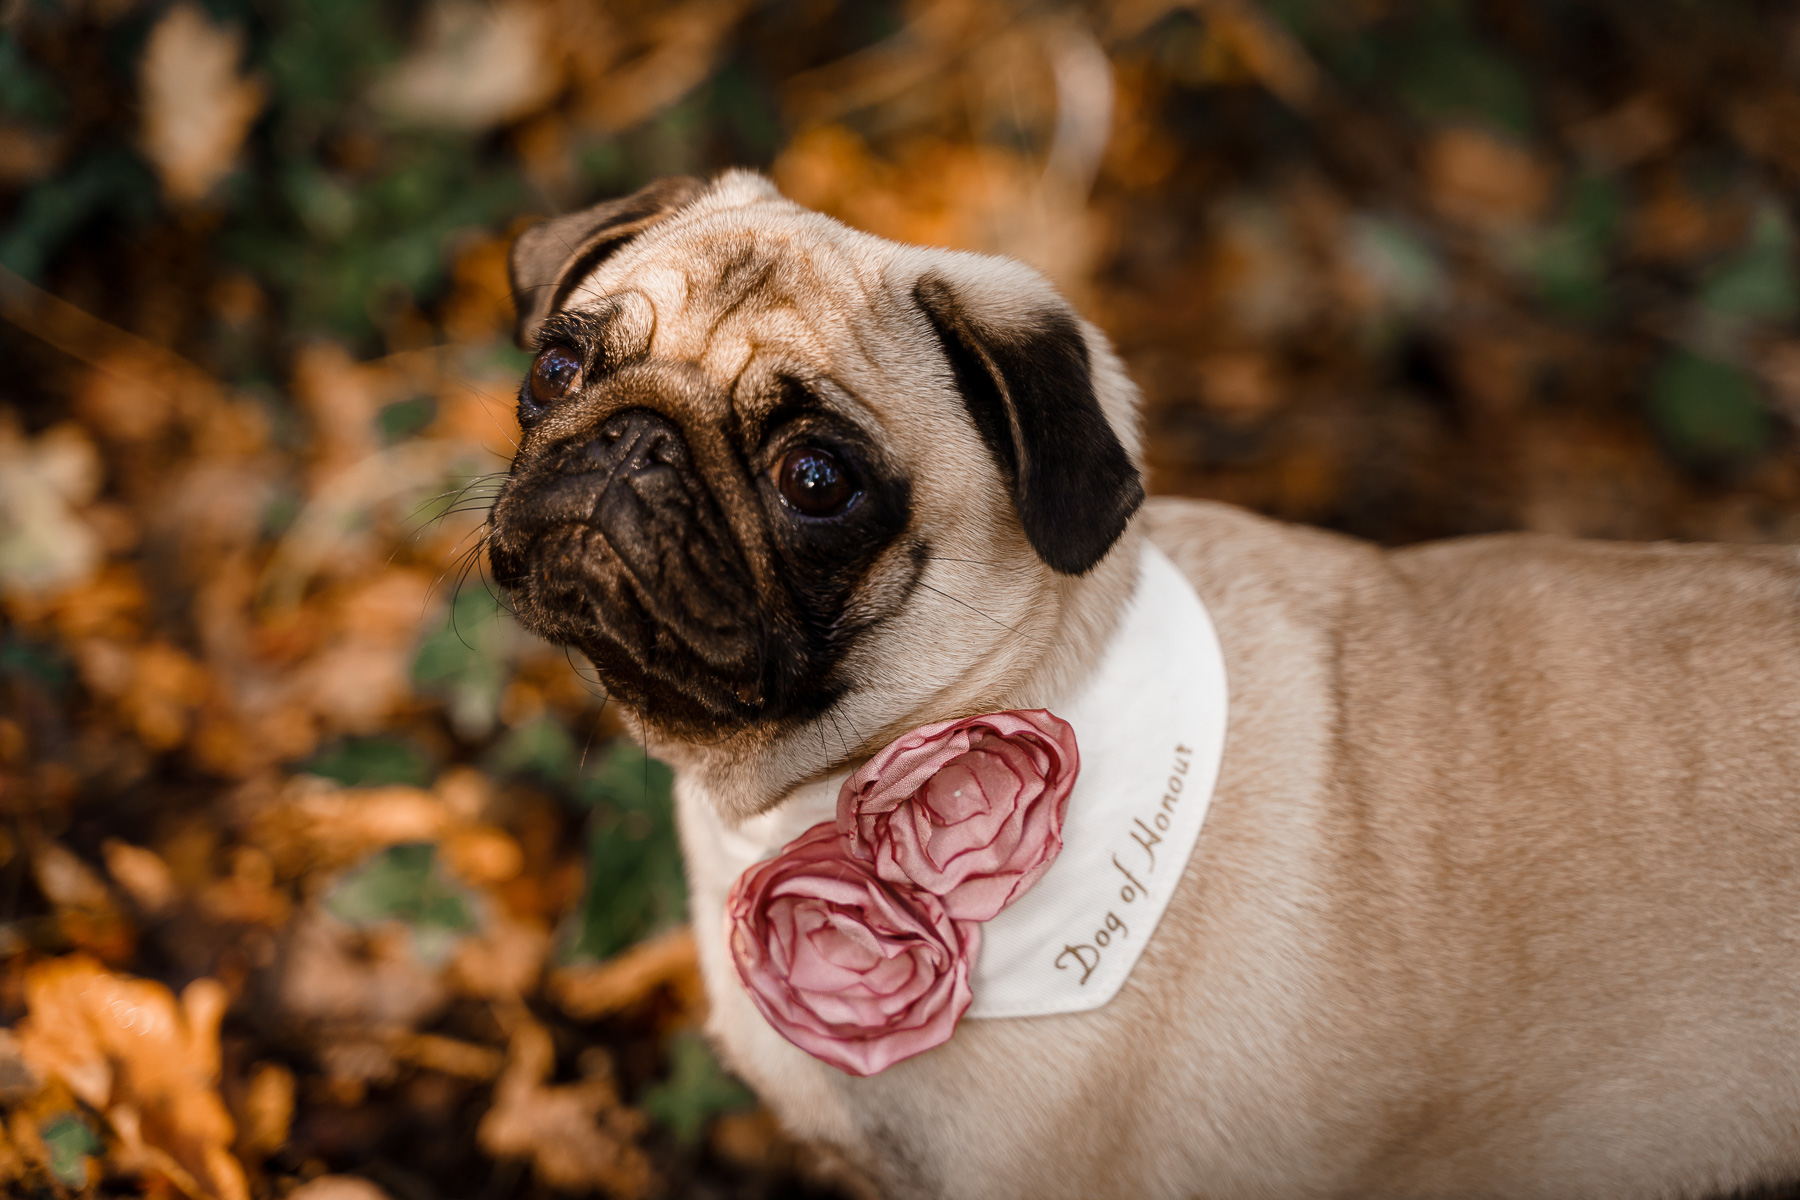 dog friendly wedding- dogs at weddings- katherine and her camera- dog wedding accessories-unconventional wedding- wedding planning advice- pets at weddings- dog of honour